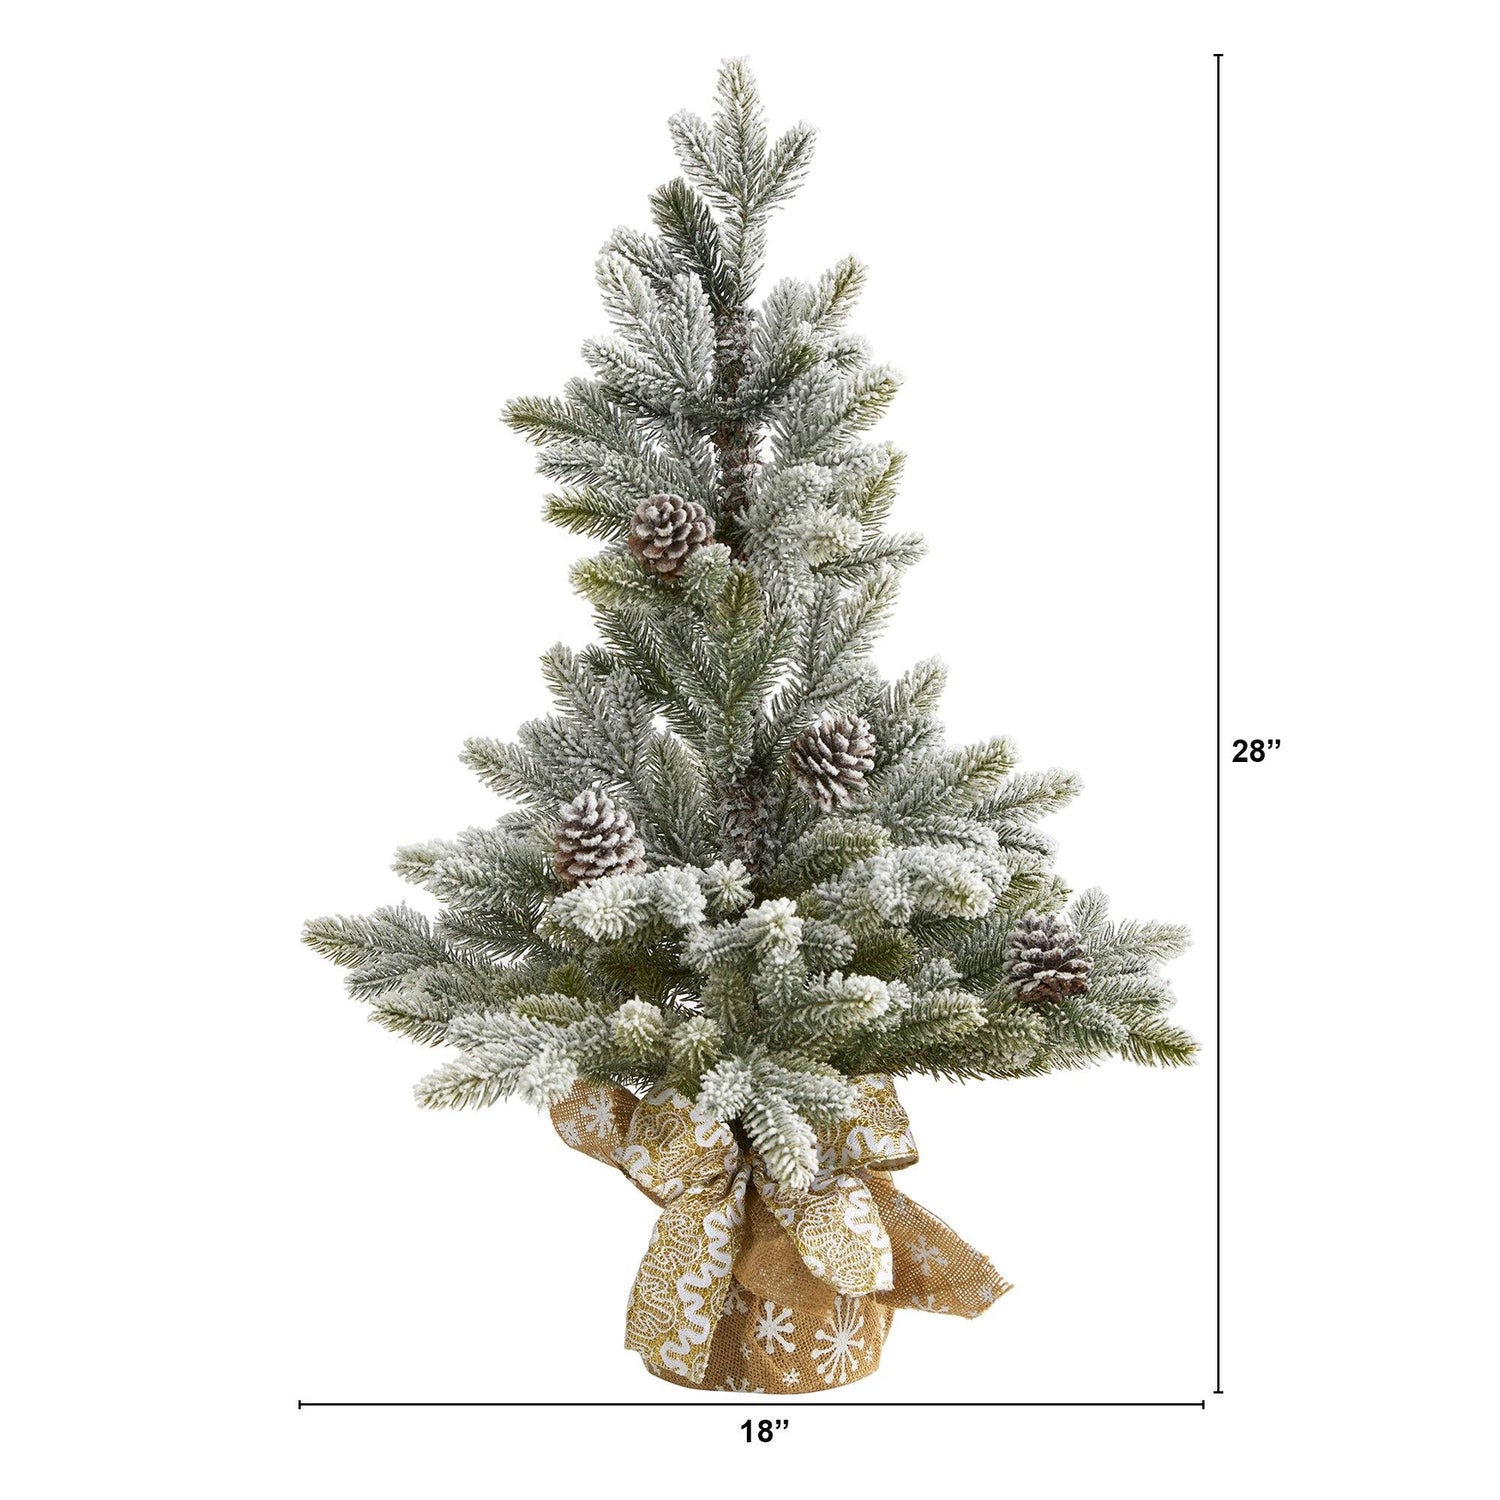 28” Flocked Artificial Christmas Tree with Pine Cones